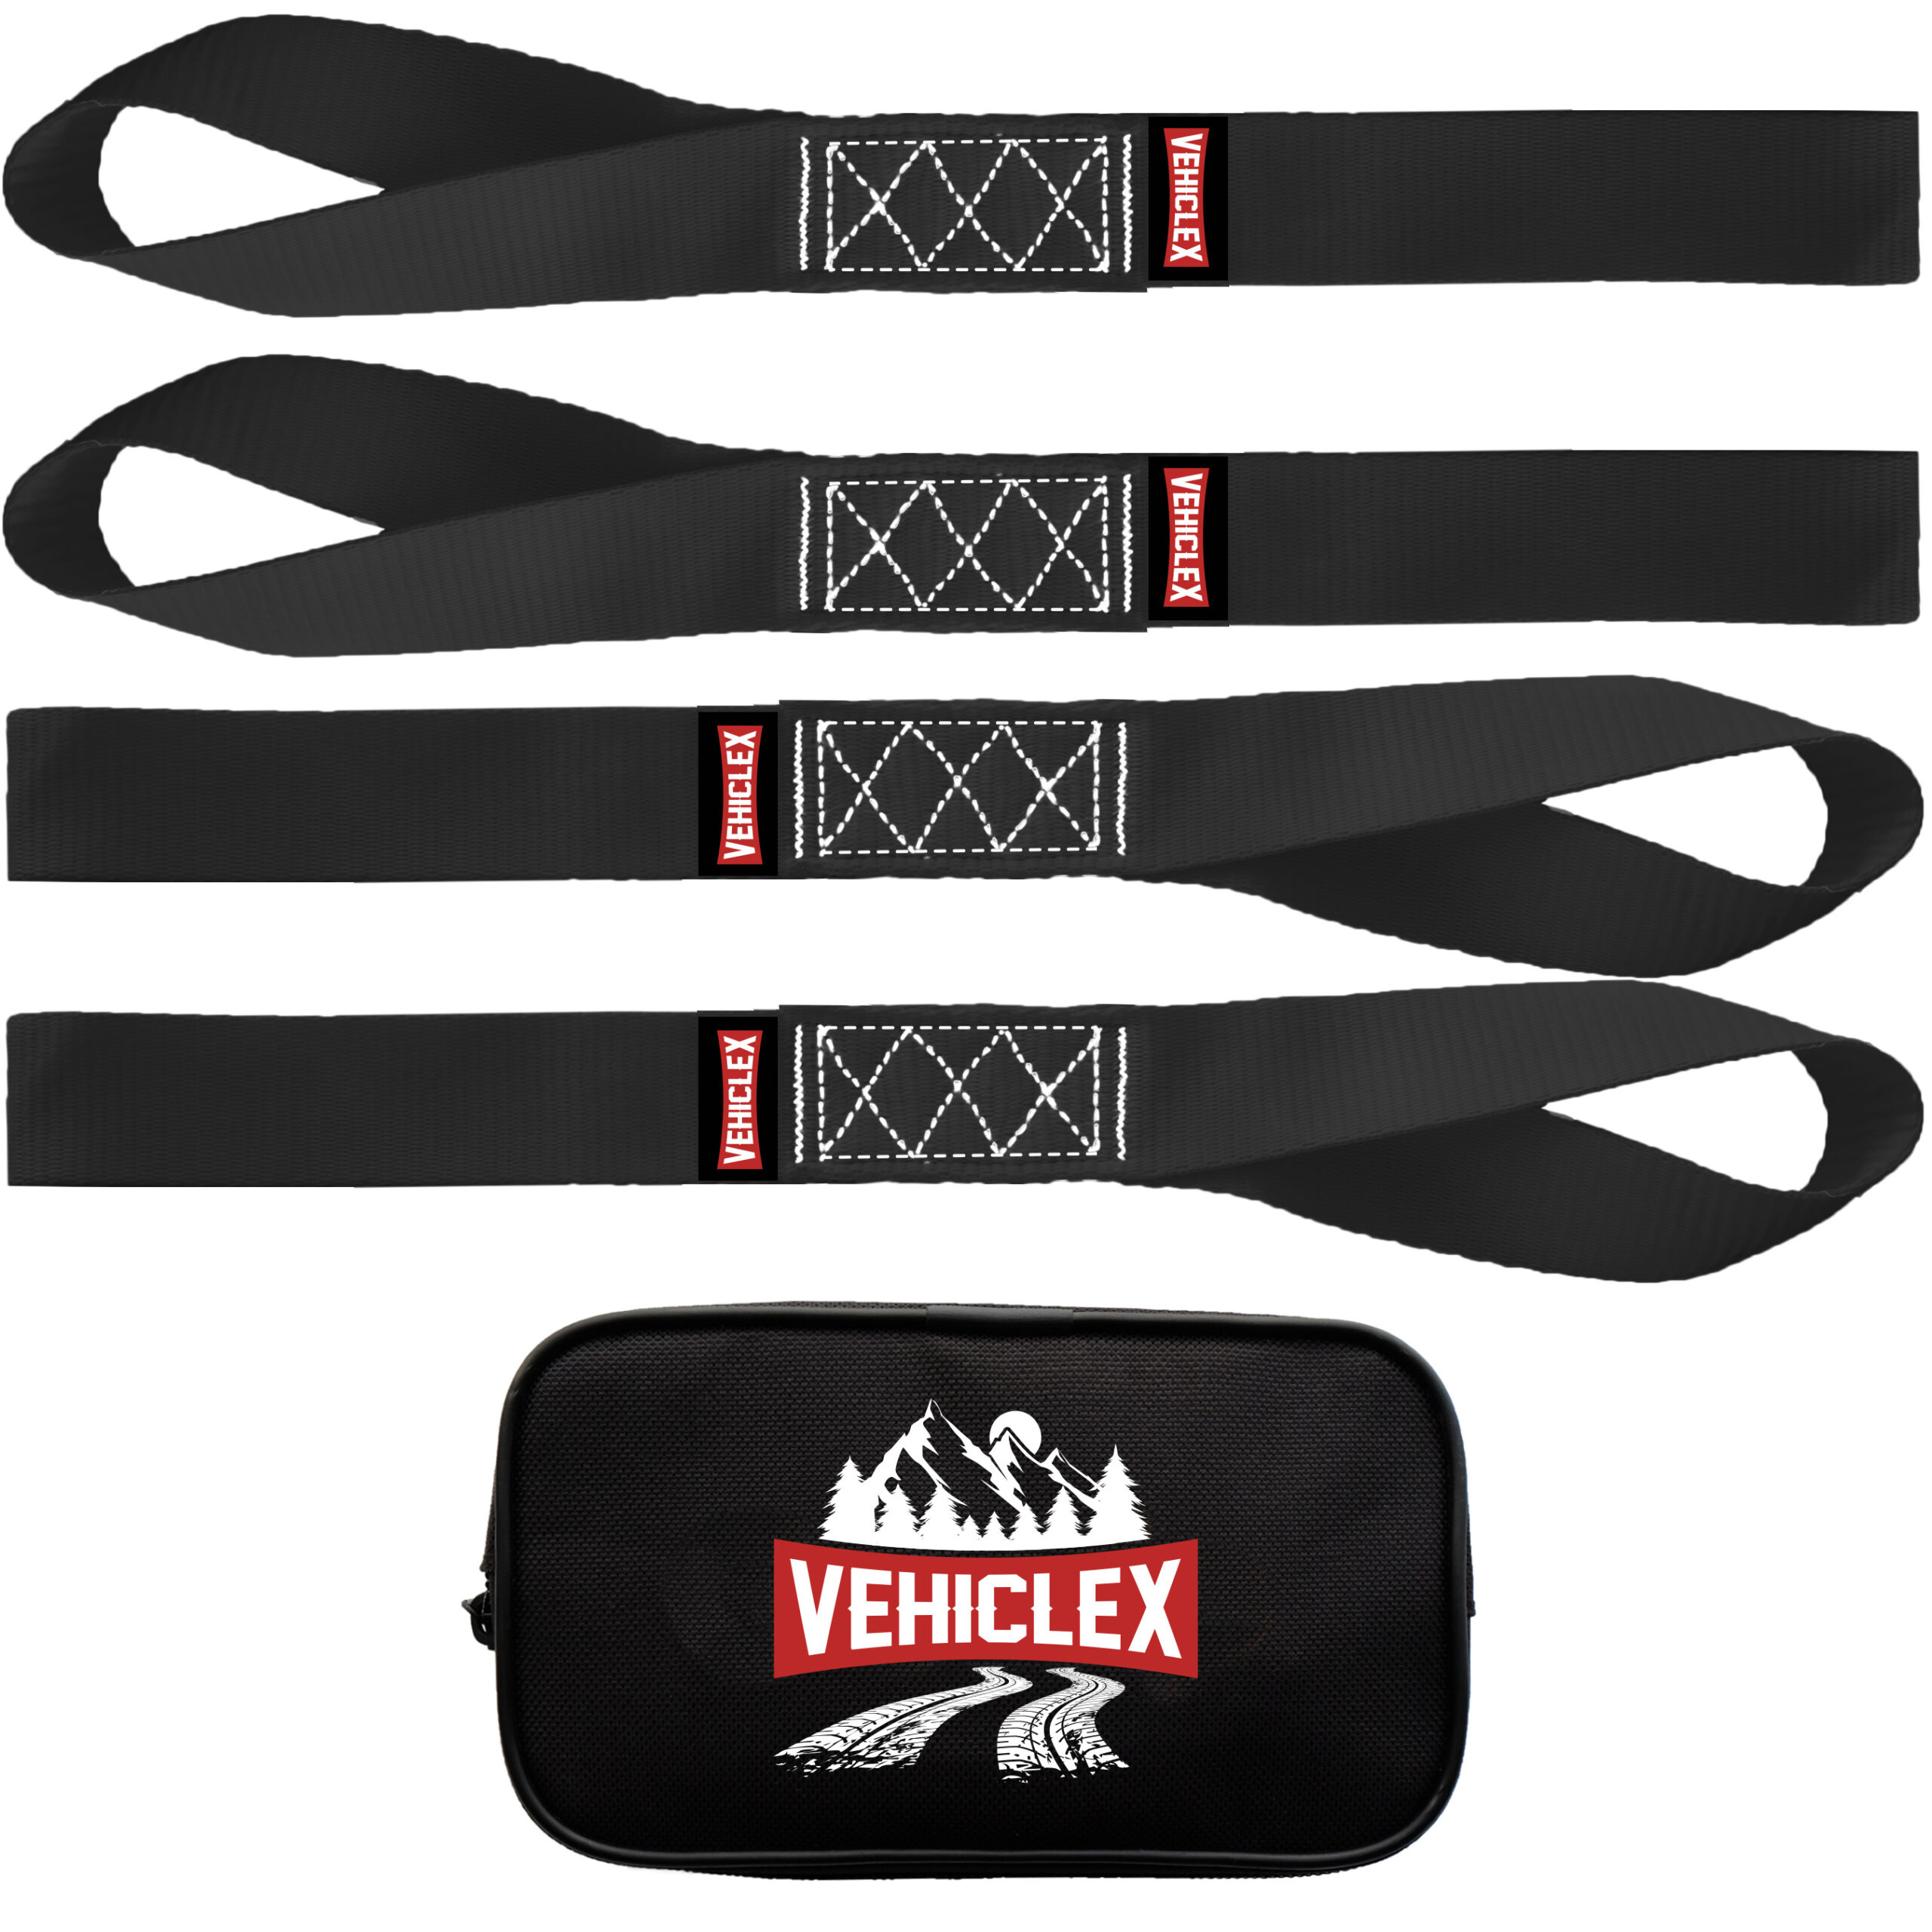 TGL 10,500 Pound Soft Loop Tie Downs Motorcycle Tie Downs 4-pack 